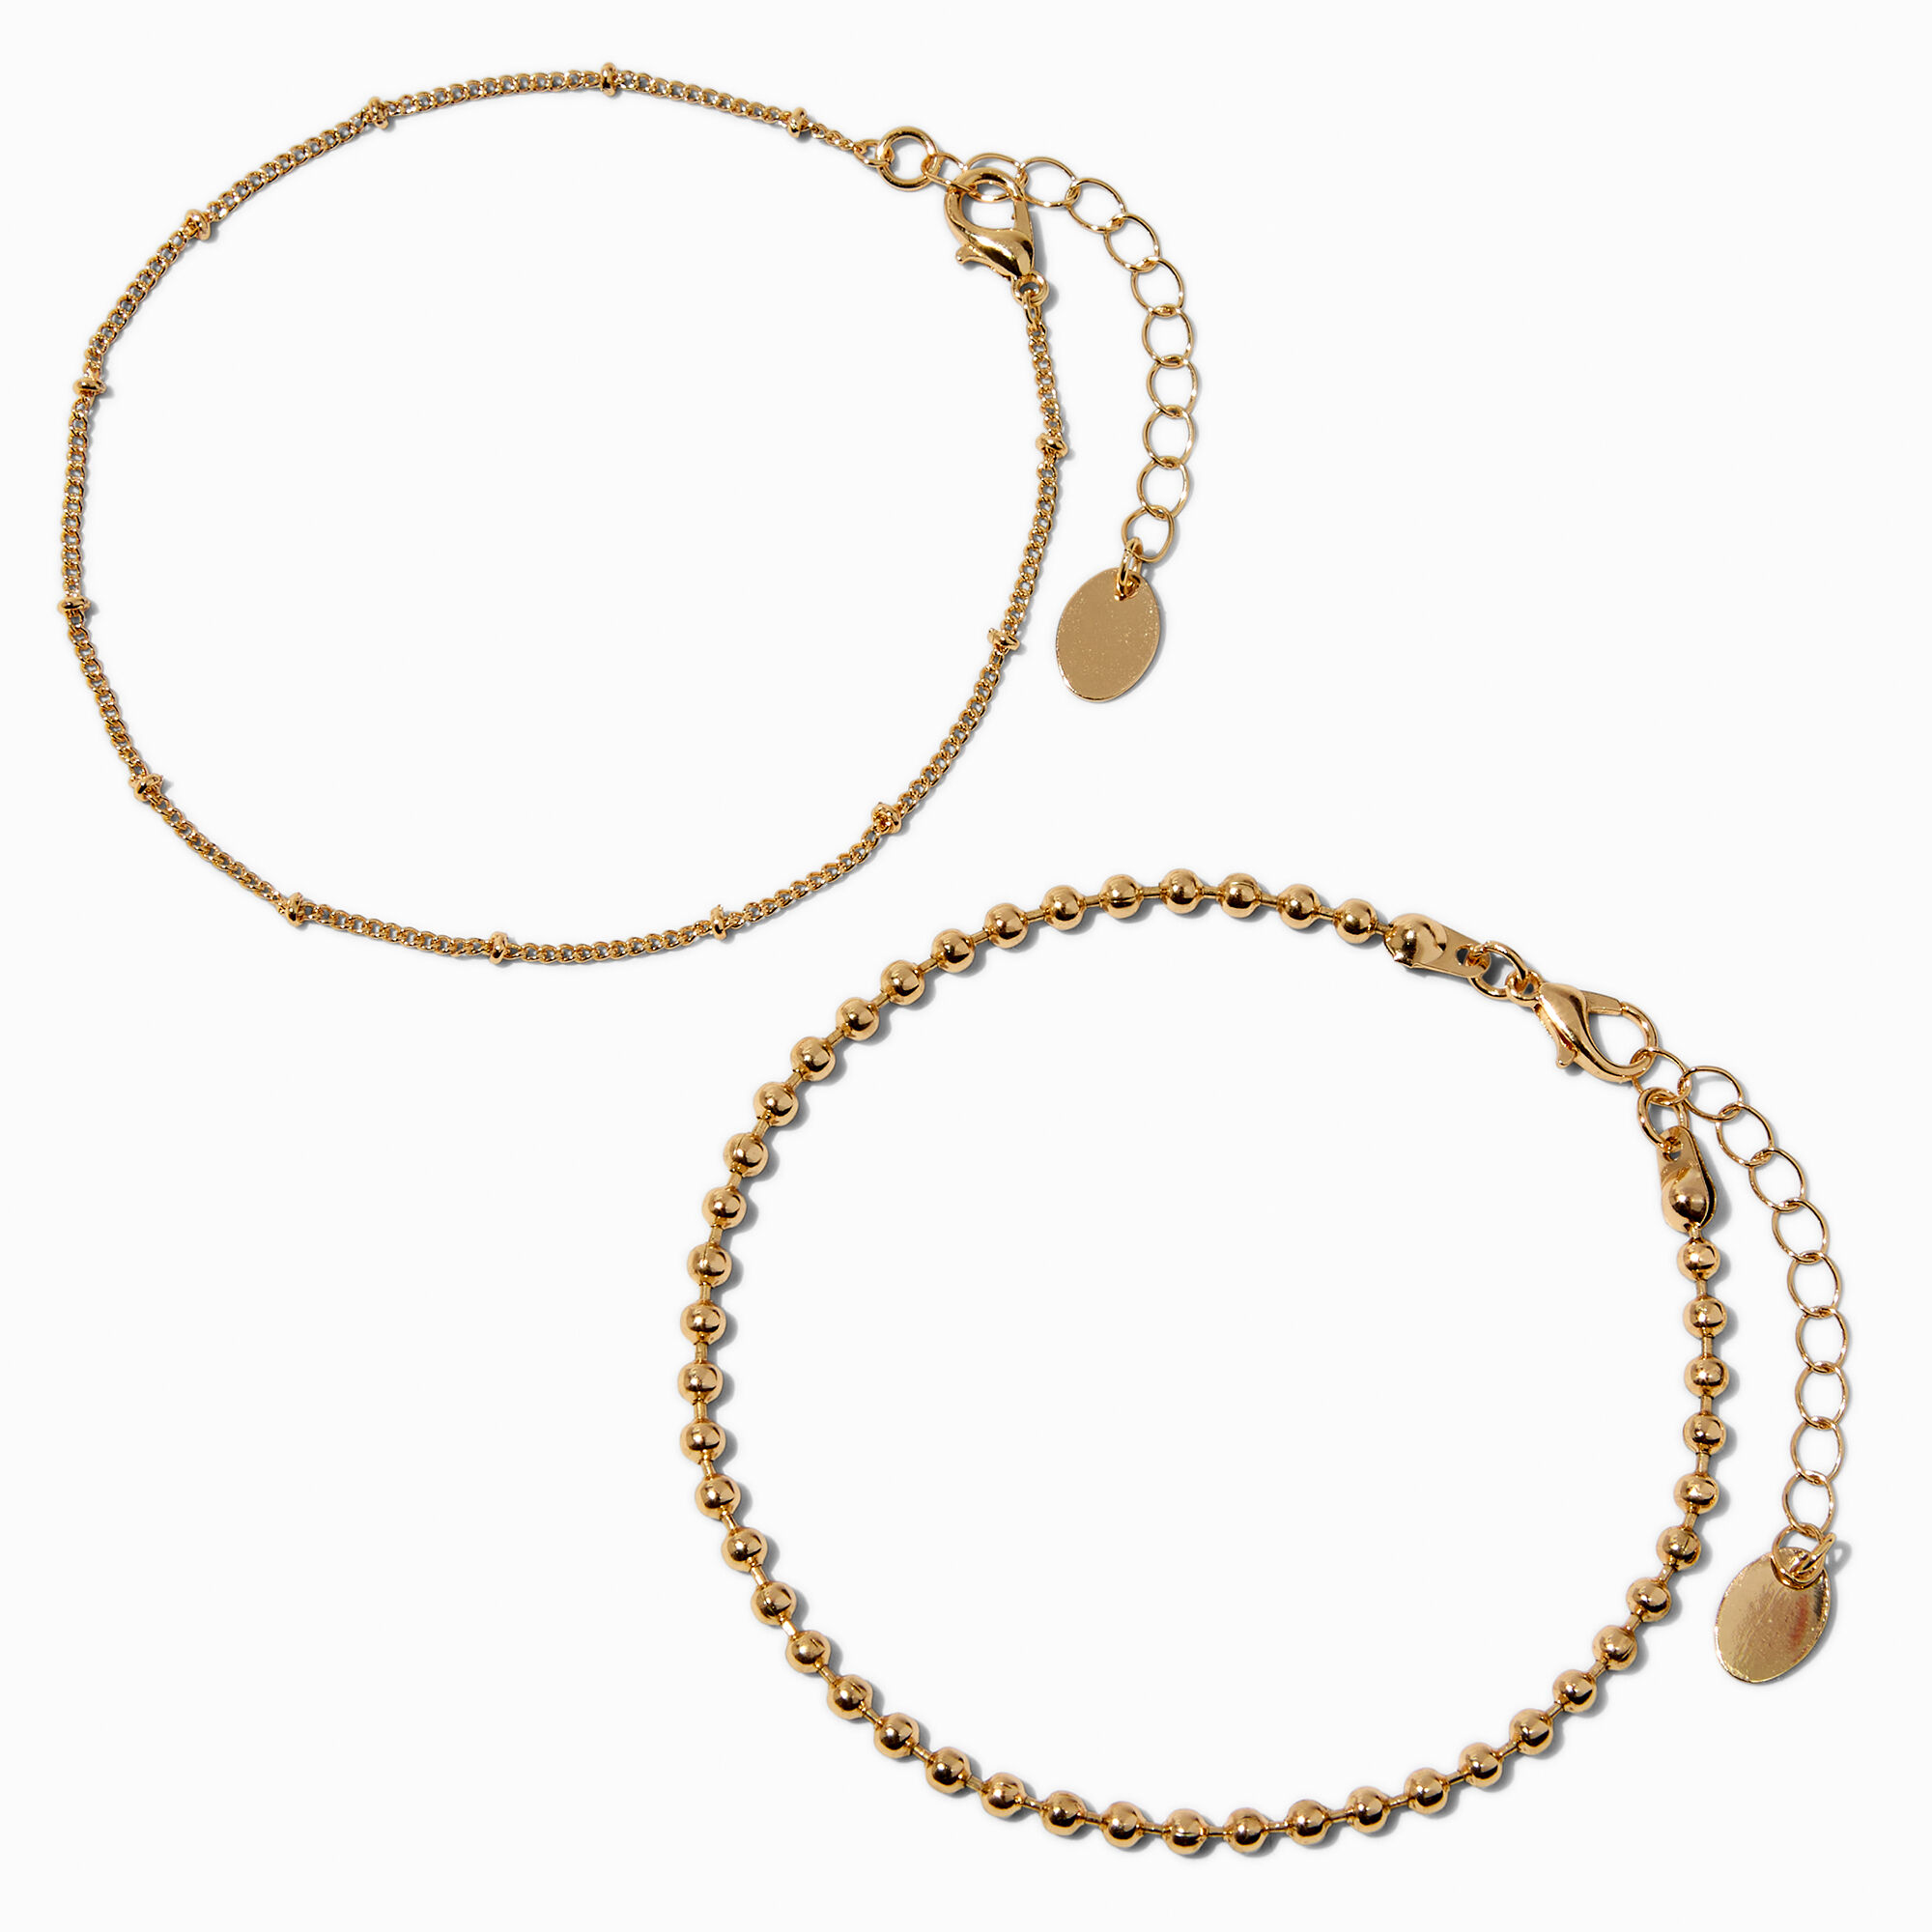 View Claires Tone Ball Chain Bracelets 2 Pack Gold information